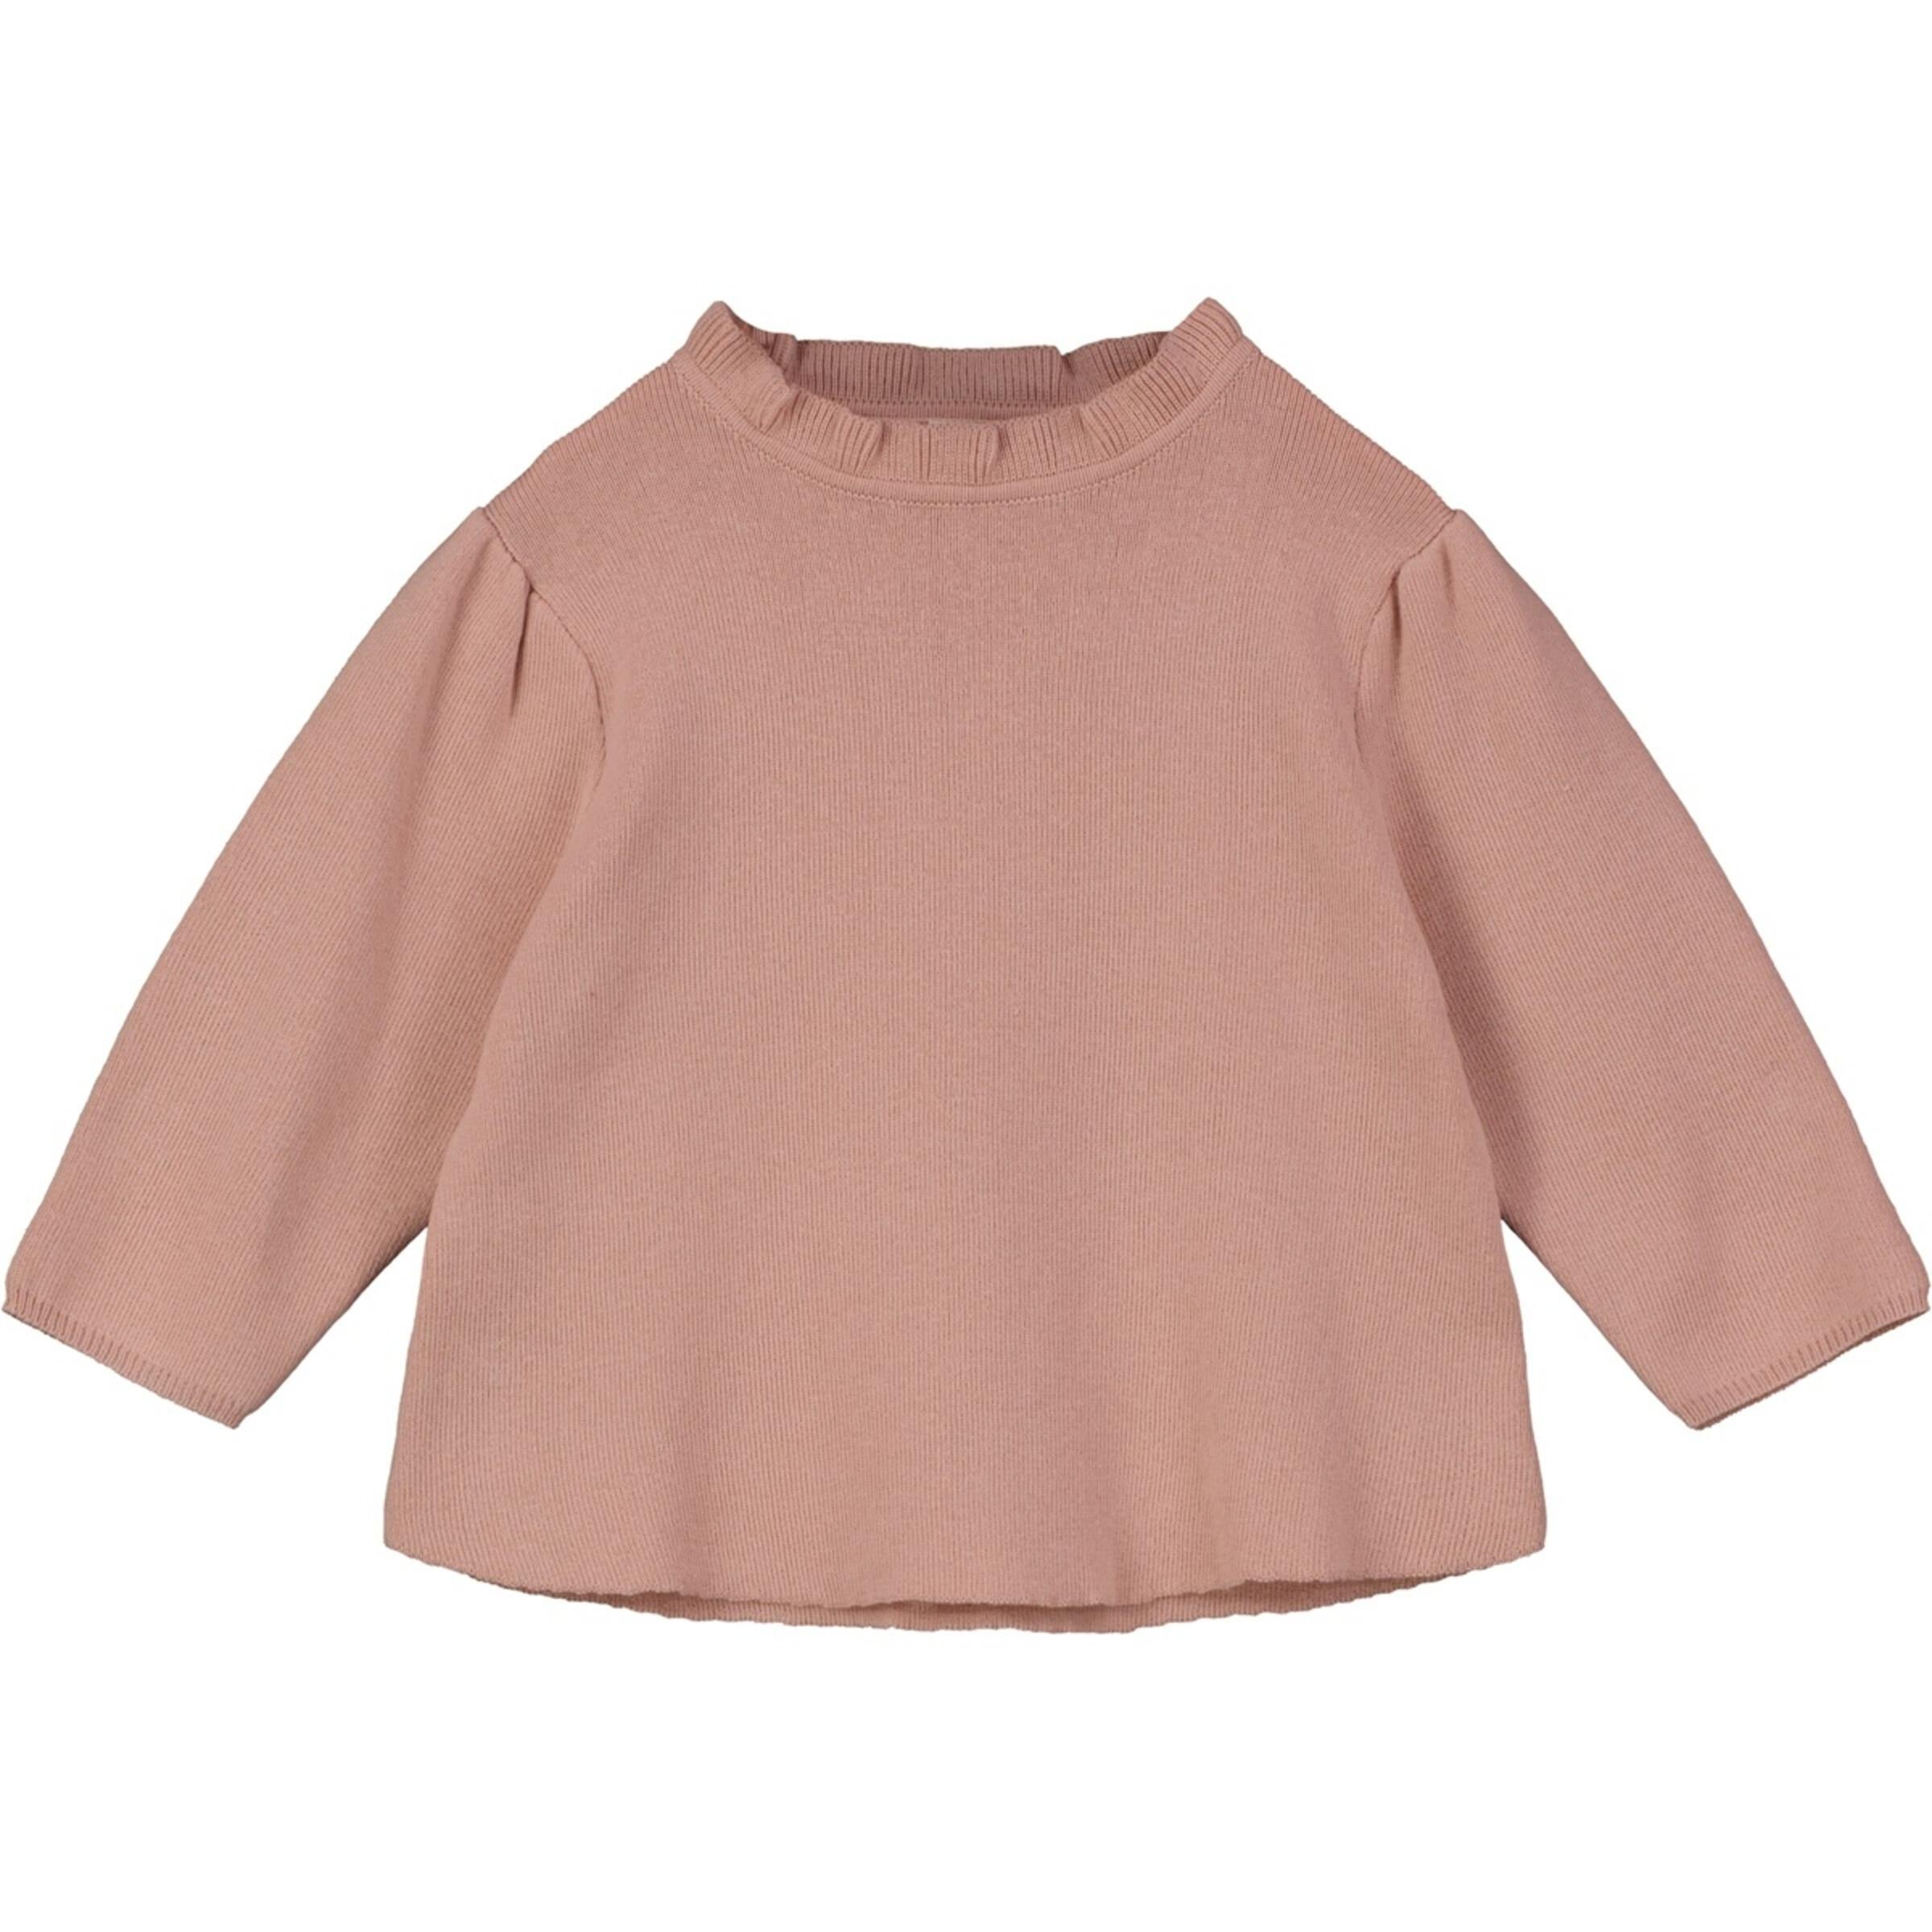 long sleeve dusty pink sweater with ruffle detail at the neck